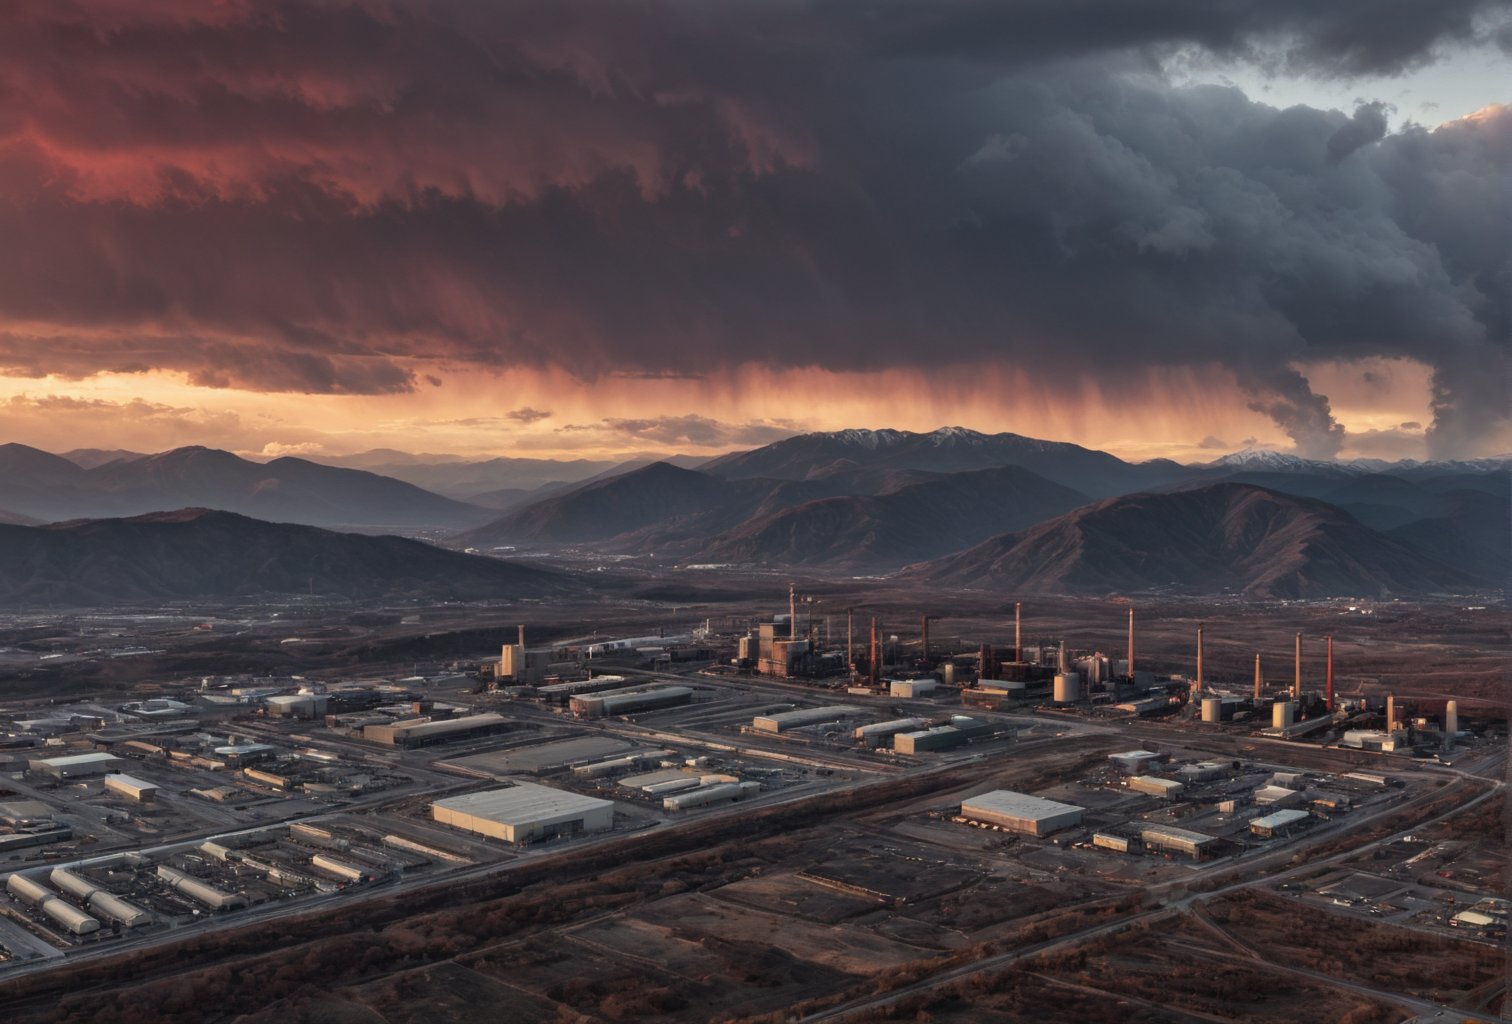 The image depicts a dramatic and industrial landscape. A thick layer of gray clouds dominates the sky, illuminated in a deep red hue from above. Amidst the clouds, a small golden sun peeks out, adding a touch of warmth to the otherwise gloomy atmosphere. In the distance, on the horizon, a range of gray mountains stretches across the landscape. Among these mountains, power plants and industrial buildings can be seen, their structures blending into the rugged terrain. Closer to the foreground, the mountains take on a darker tone, gradually transitioning to black mountains that loom in the distance. These black mountains are also dotted with power plants and industrial buildings, casting long shadows in the fading light.